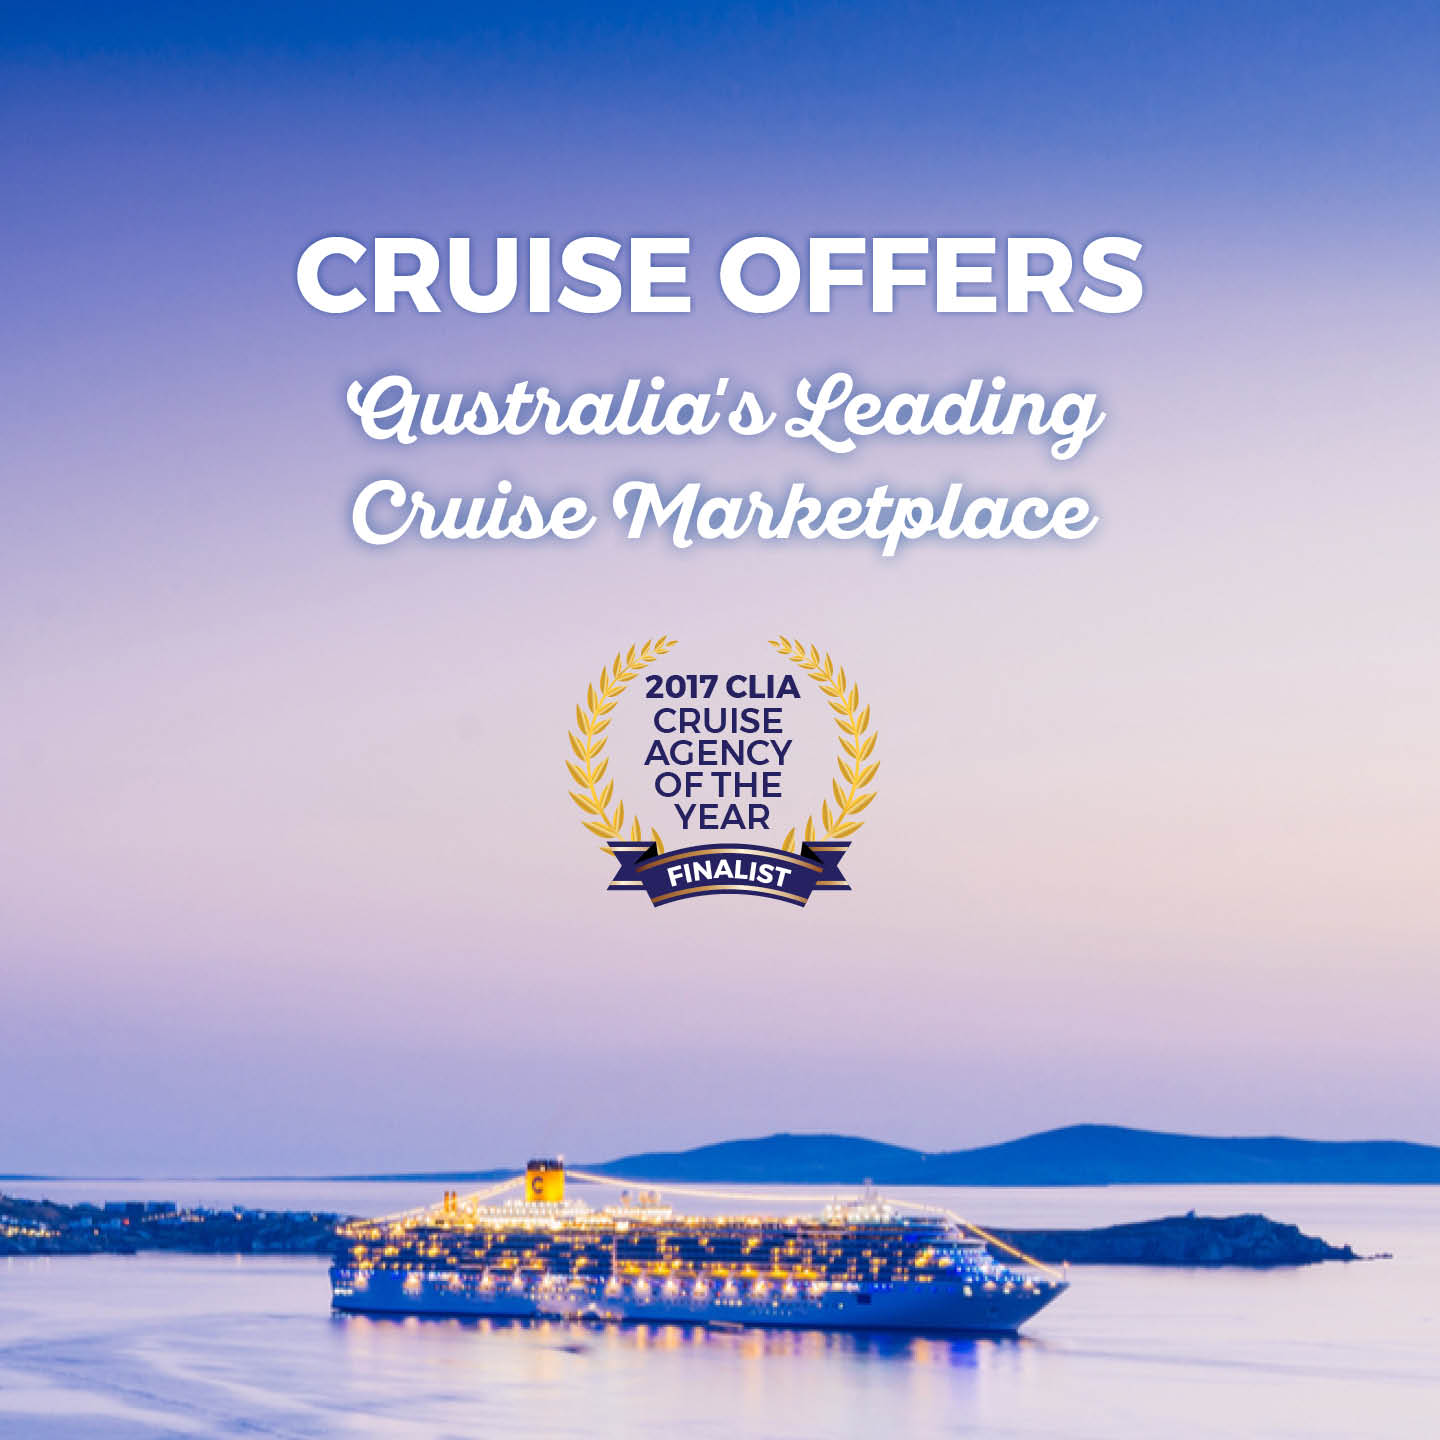 cruise-offers-about-us-1-thumb.jpg